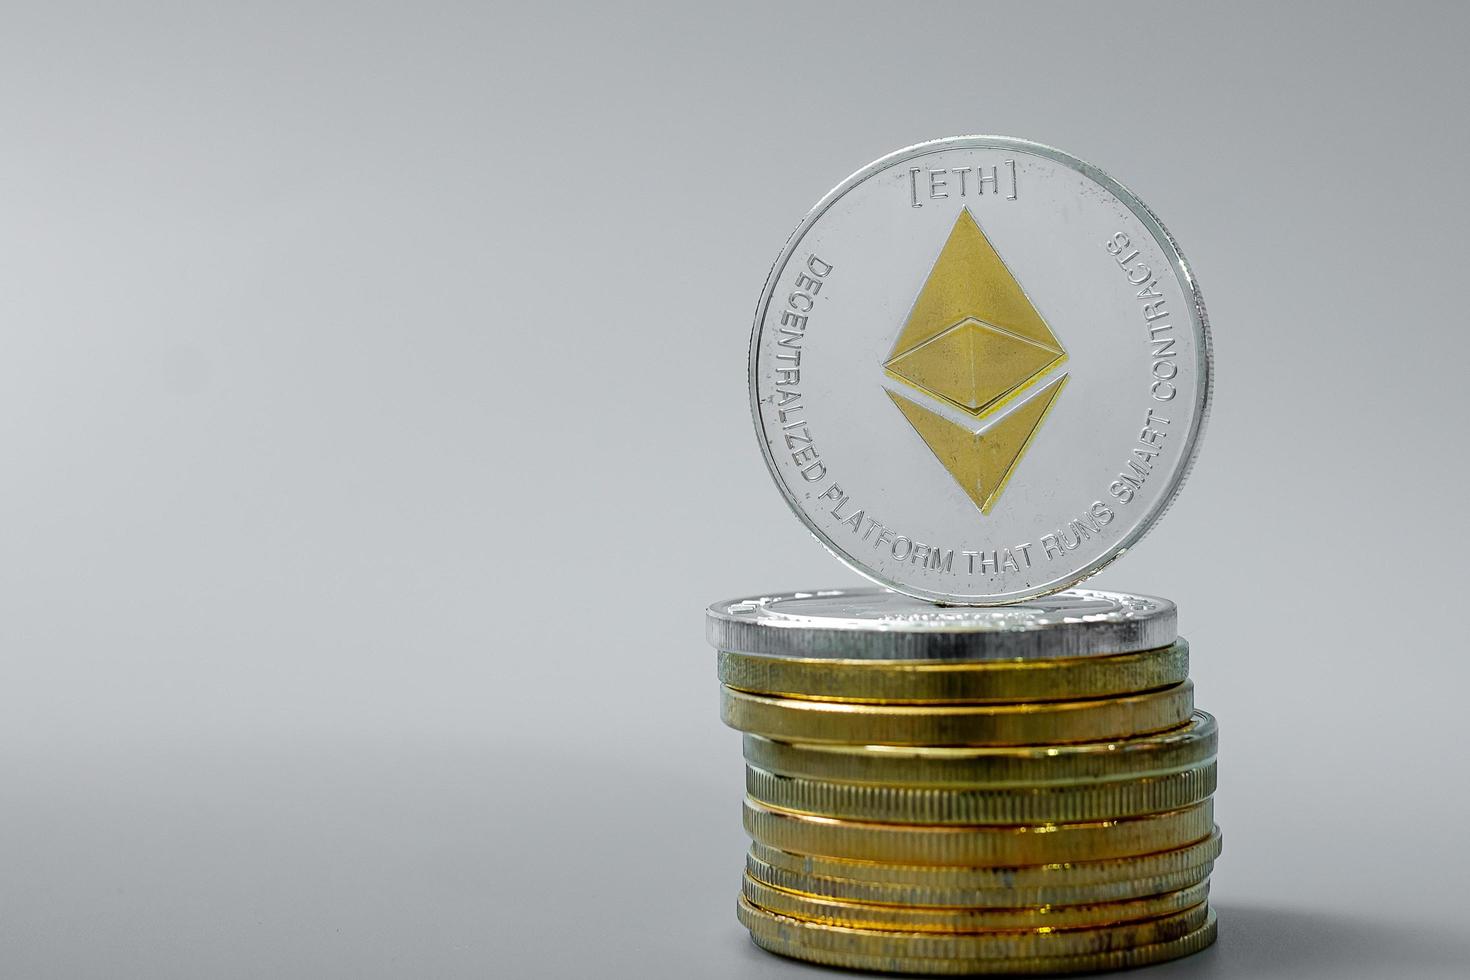 Silver Ethereum cryptocurrency coin stack, Crypto is Digital Money within the blockchain network, is exchanged using technology and online internet exchange. Financial concept photo